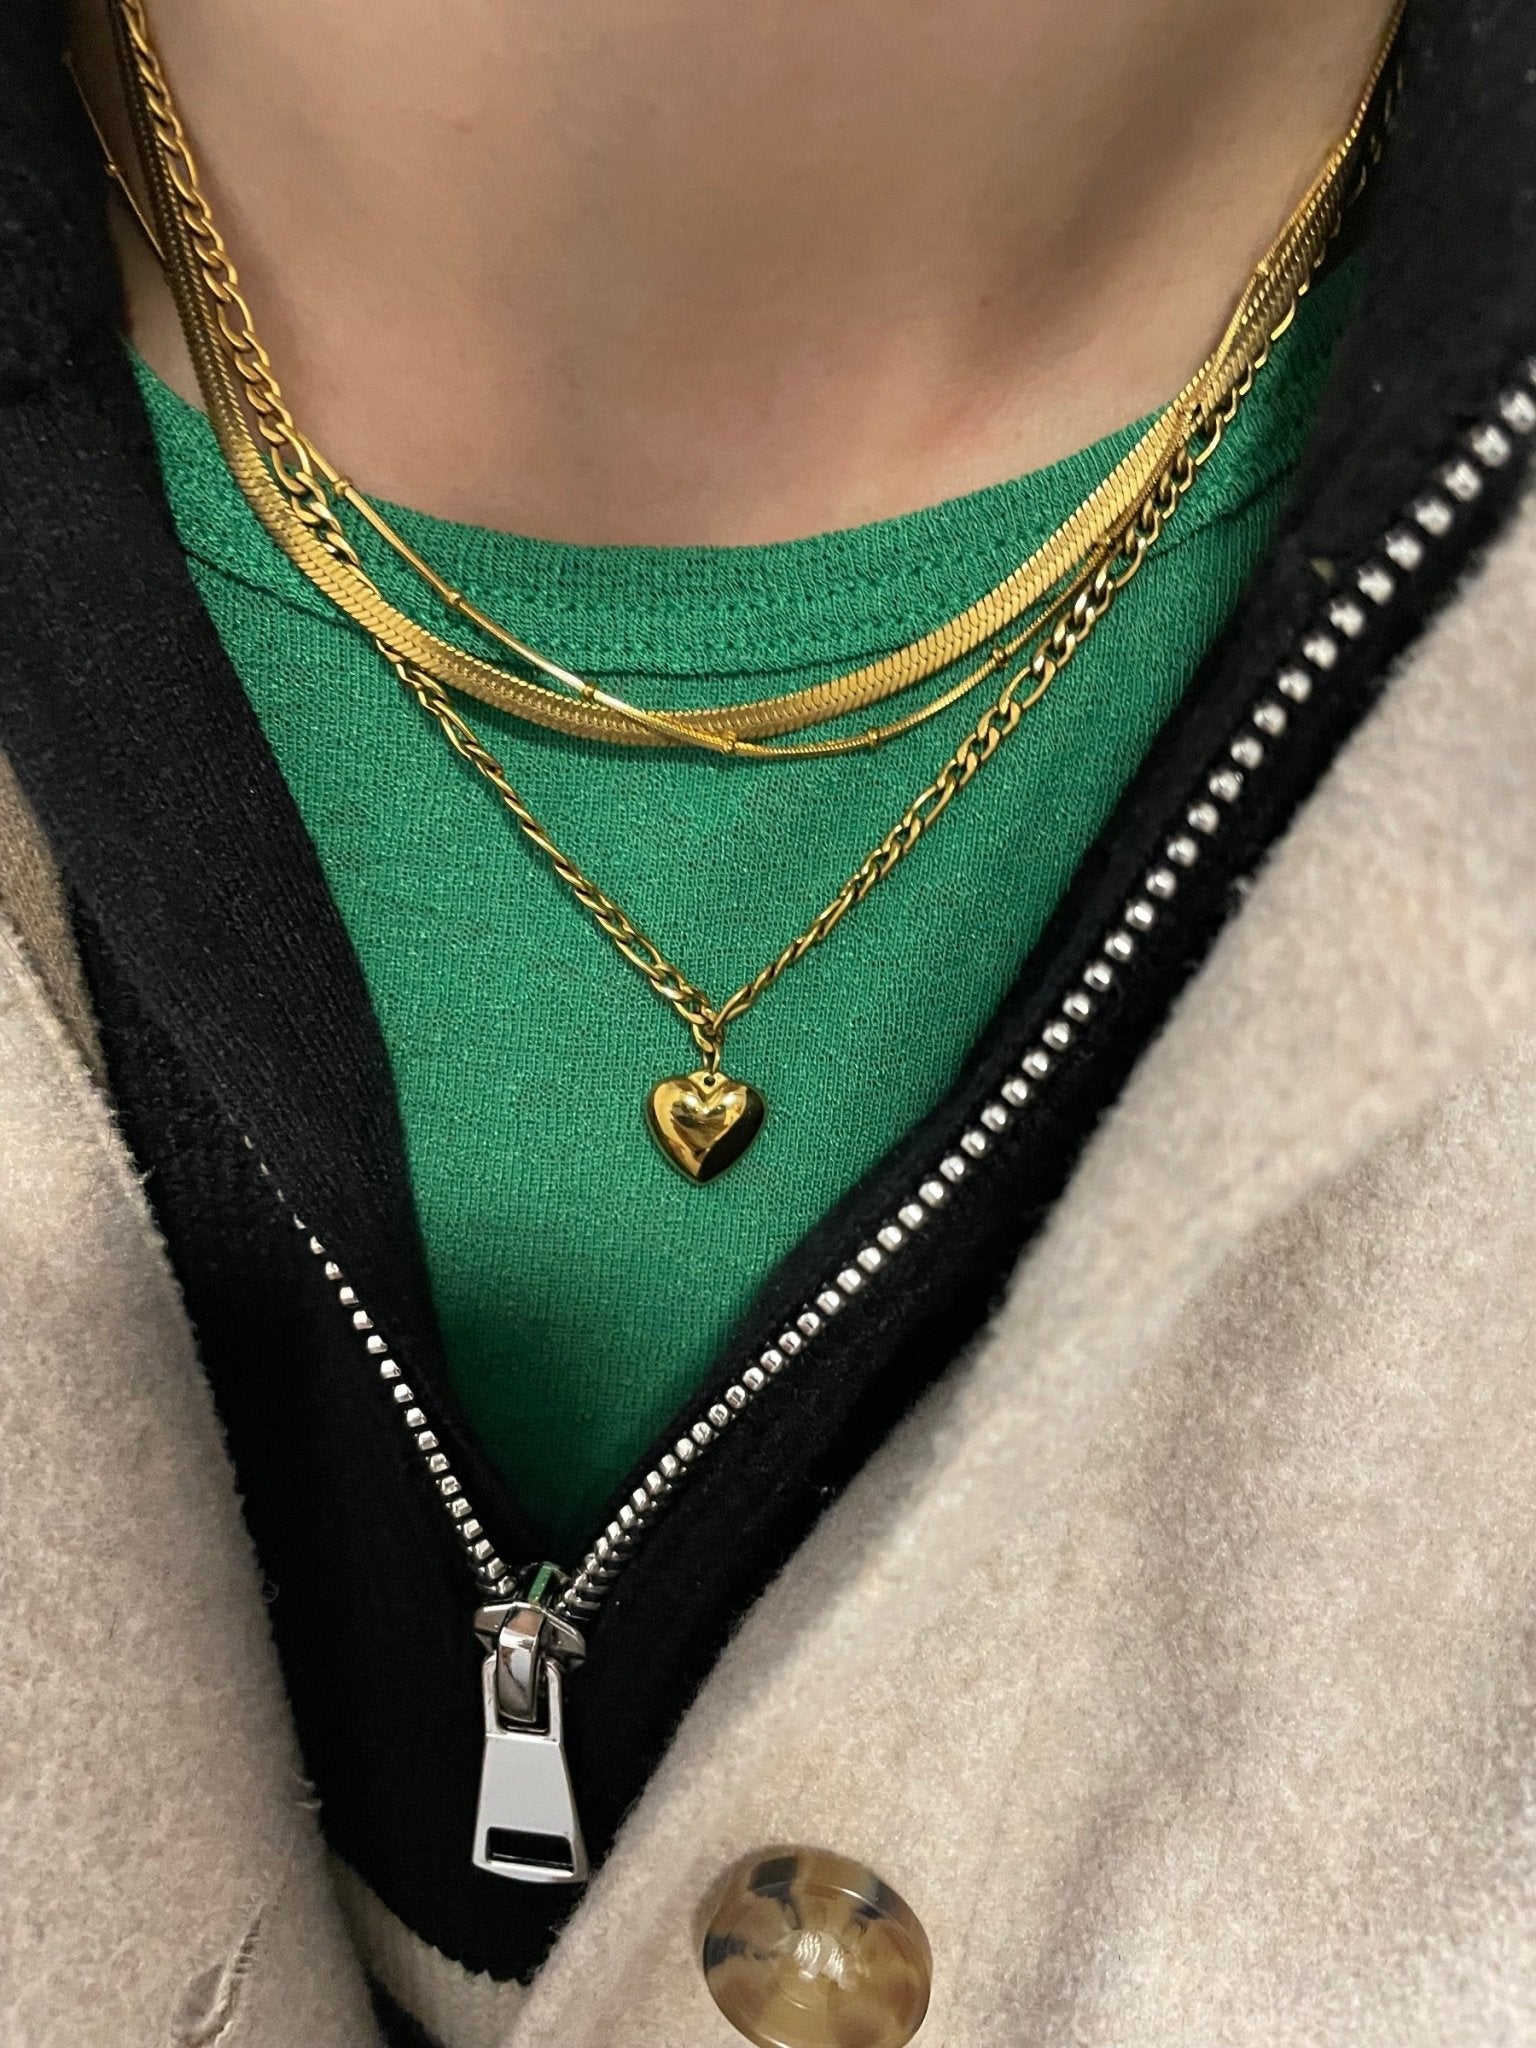 Camille Satellite Gold Chain by Koréil Jewelry